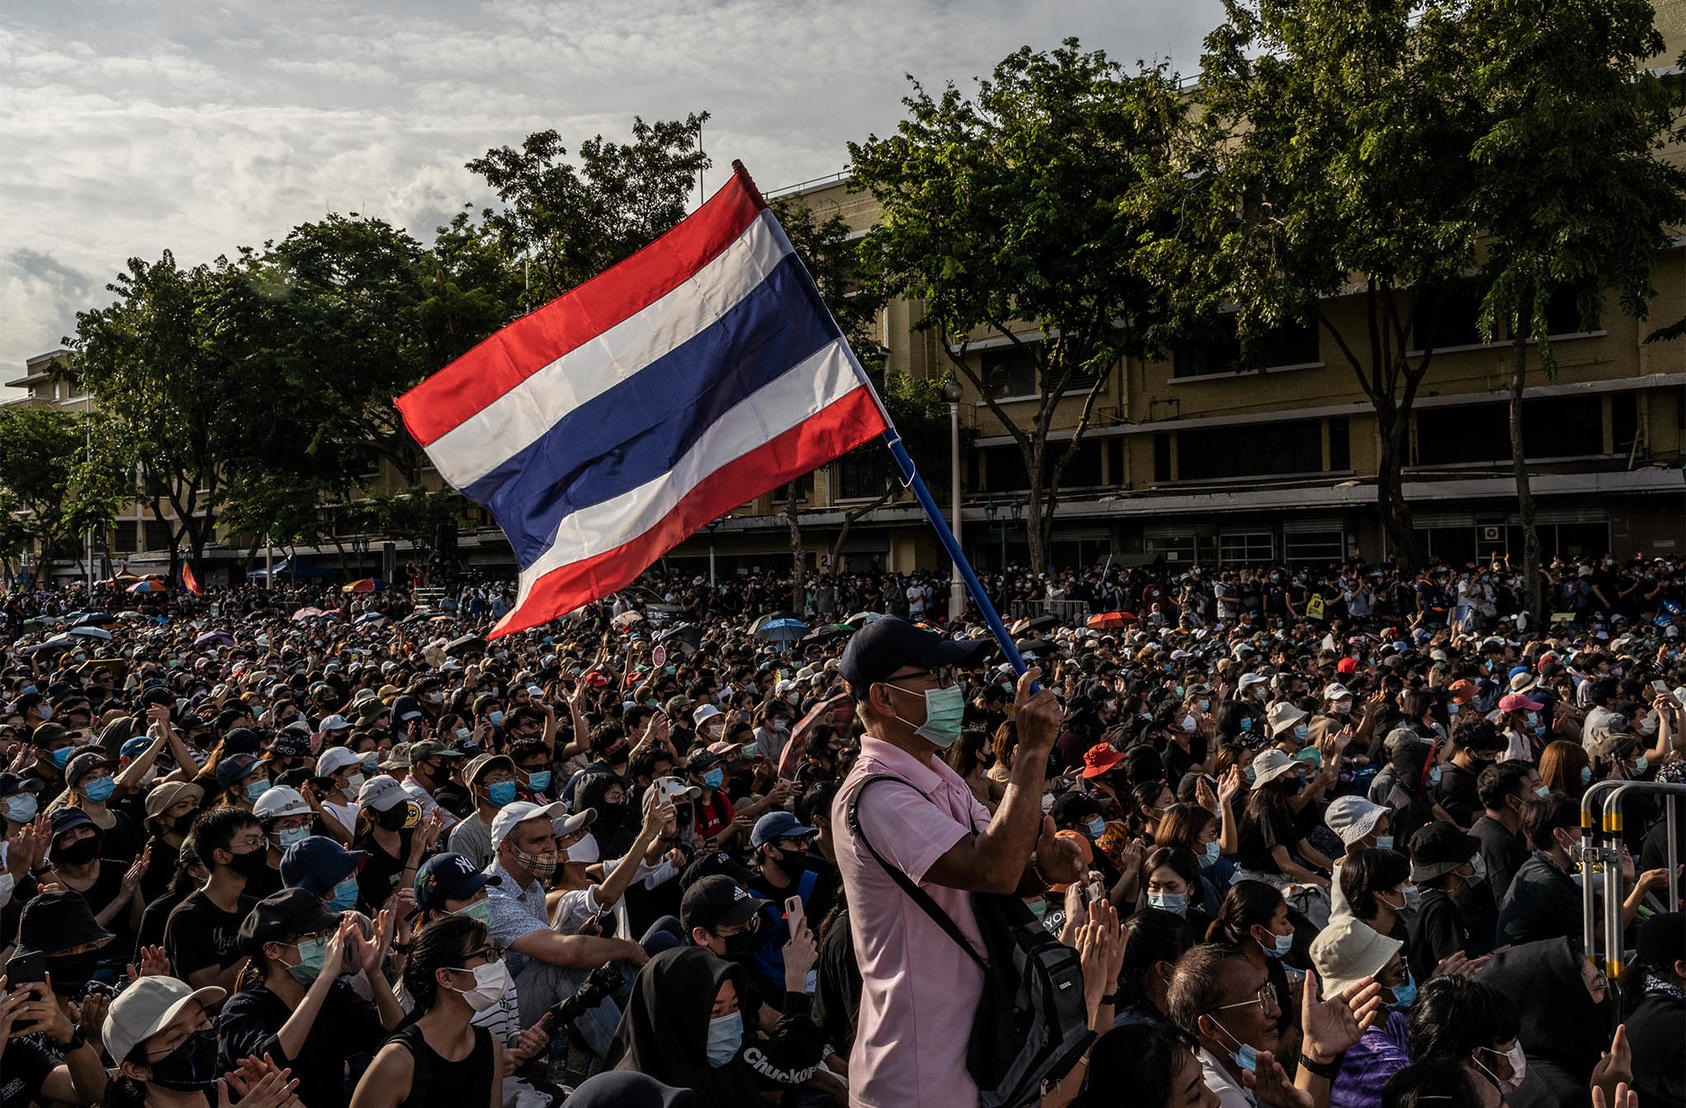 At least 10,000 protesters gathered in Bankok for the largest rally since the 2014 military coup. August 16, 2020. (Adam Dean/The New York Times)